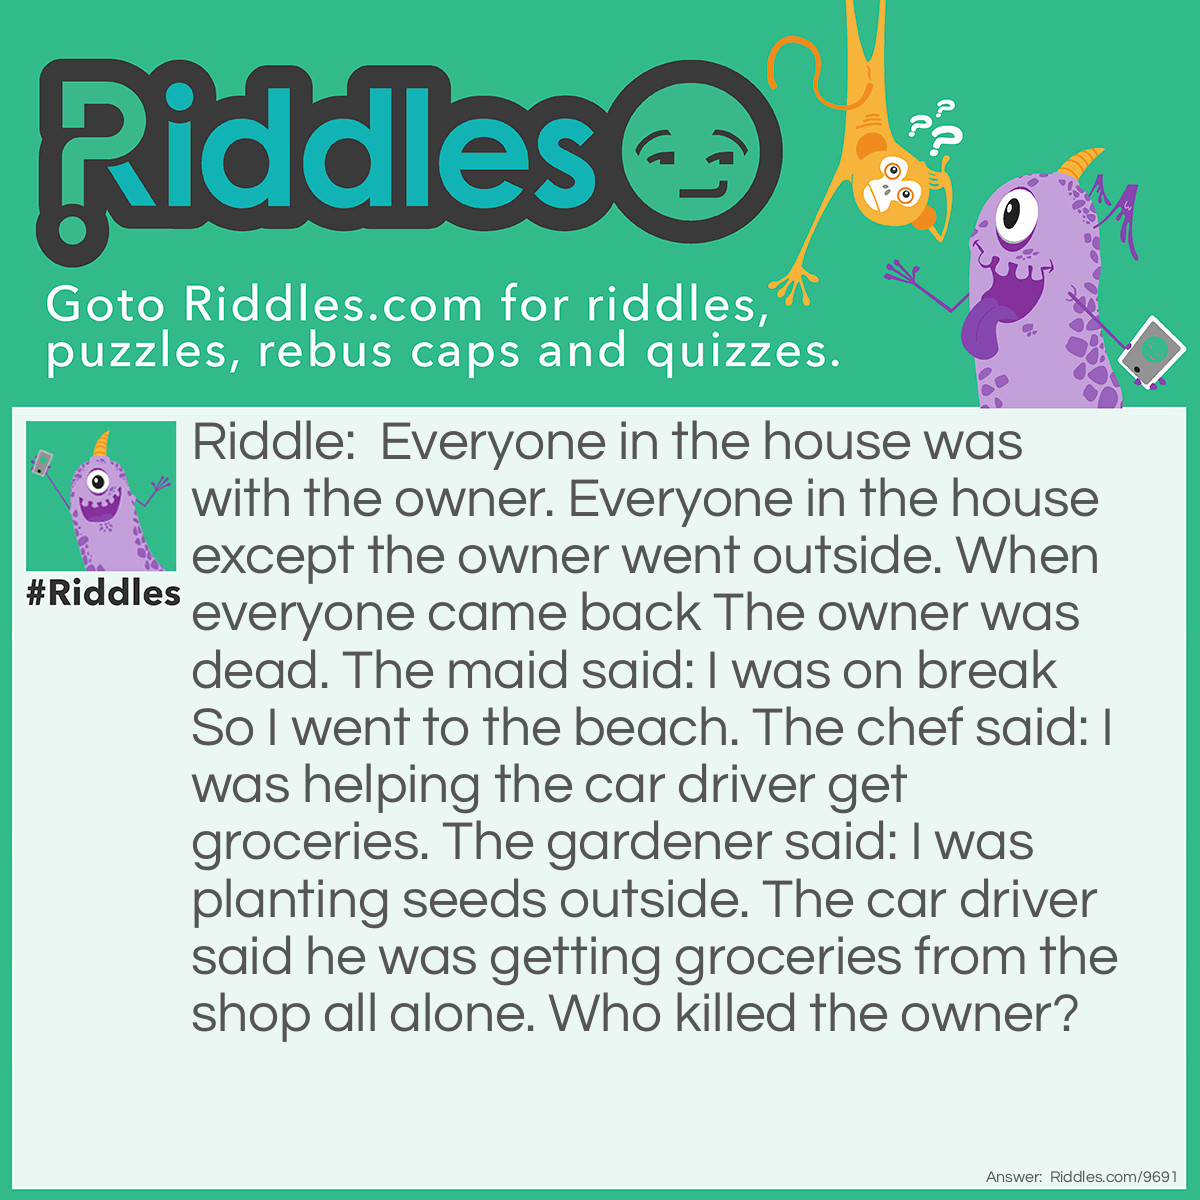 Riddle: Everyone in the house was with the owner. Everyone in the house except the owner went outside. When everyone came back The owner was dead. The maid said: I was on break So I went to the beach. The chef said: I was helping the car driver get groceries. The gardener said: I was planting seeds outside. The car driver said he was getting groceries from the shop all alone. Who killed the owner? Answer: The chef did. When the car driver said he was getting groceries A L O N E. The chef said He was going with the car driver. So it’s the chef.